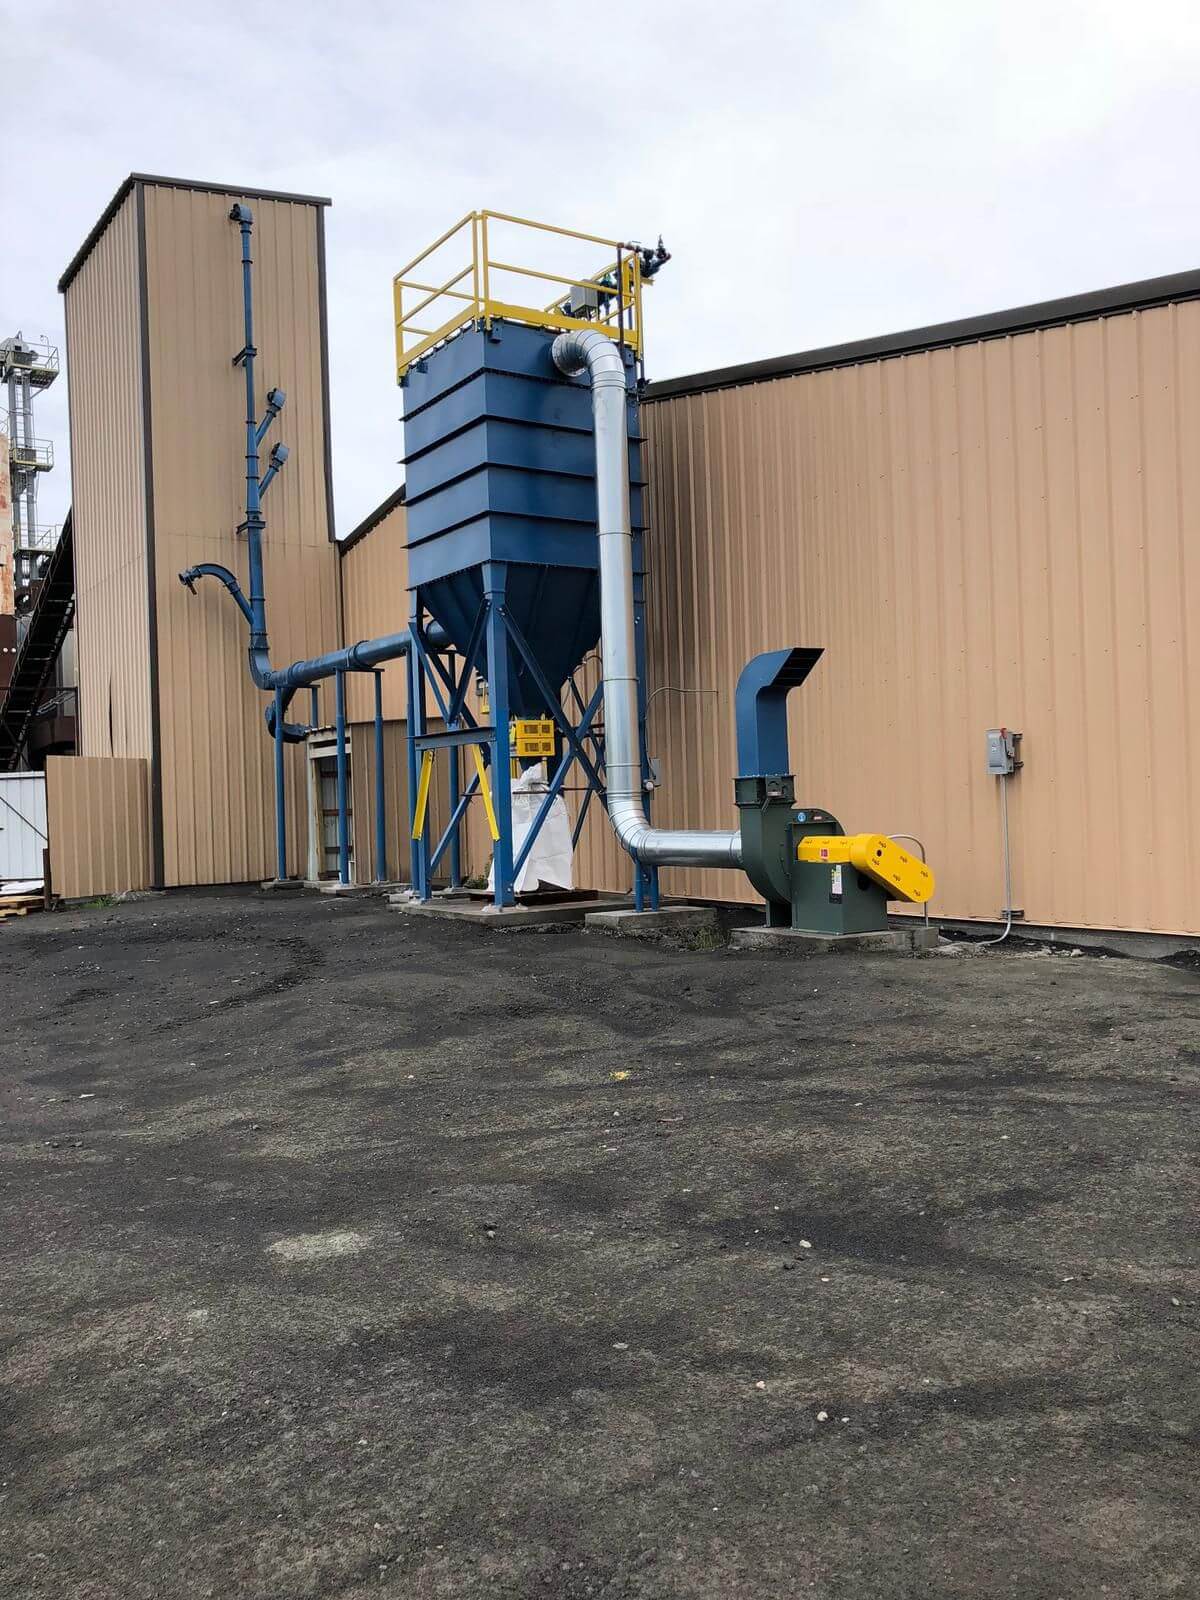 La Cygne's updated bagging operations' new dust collection system